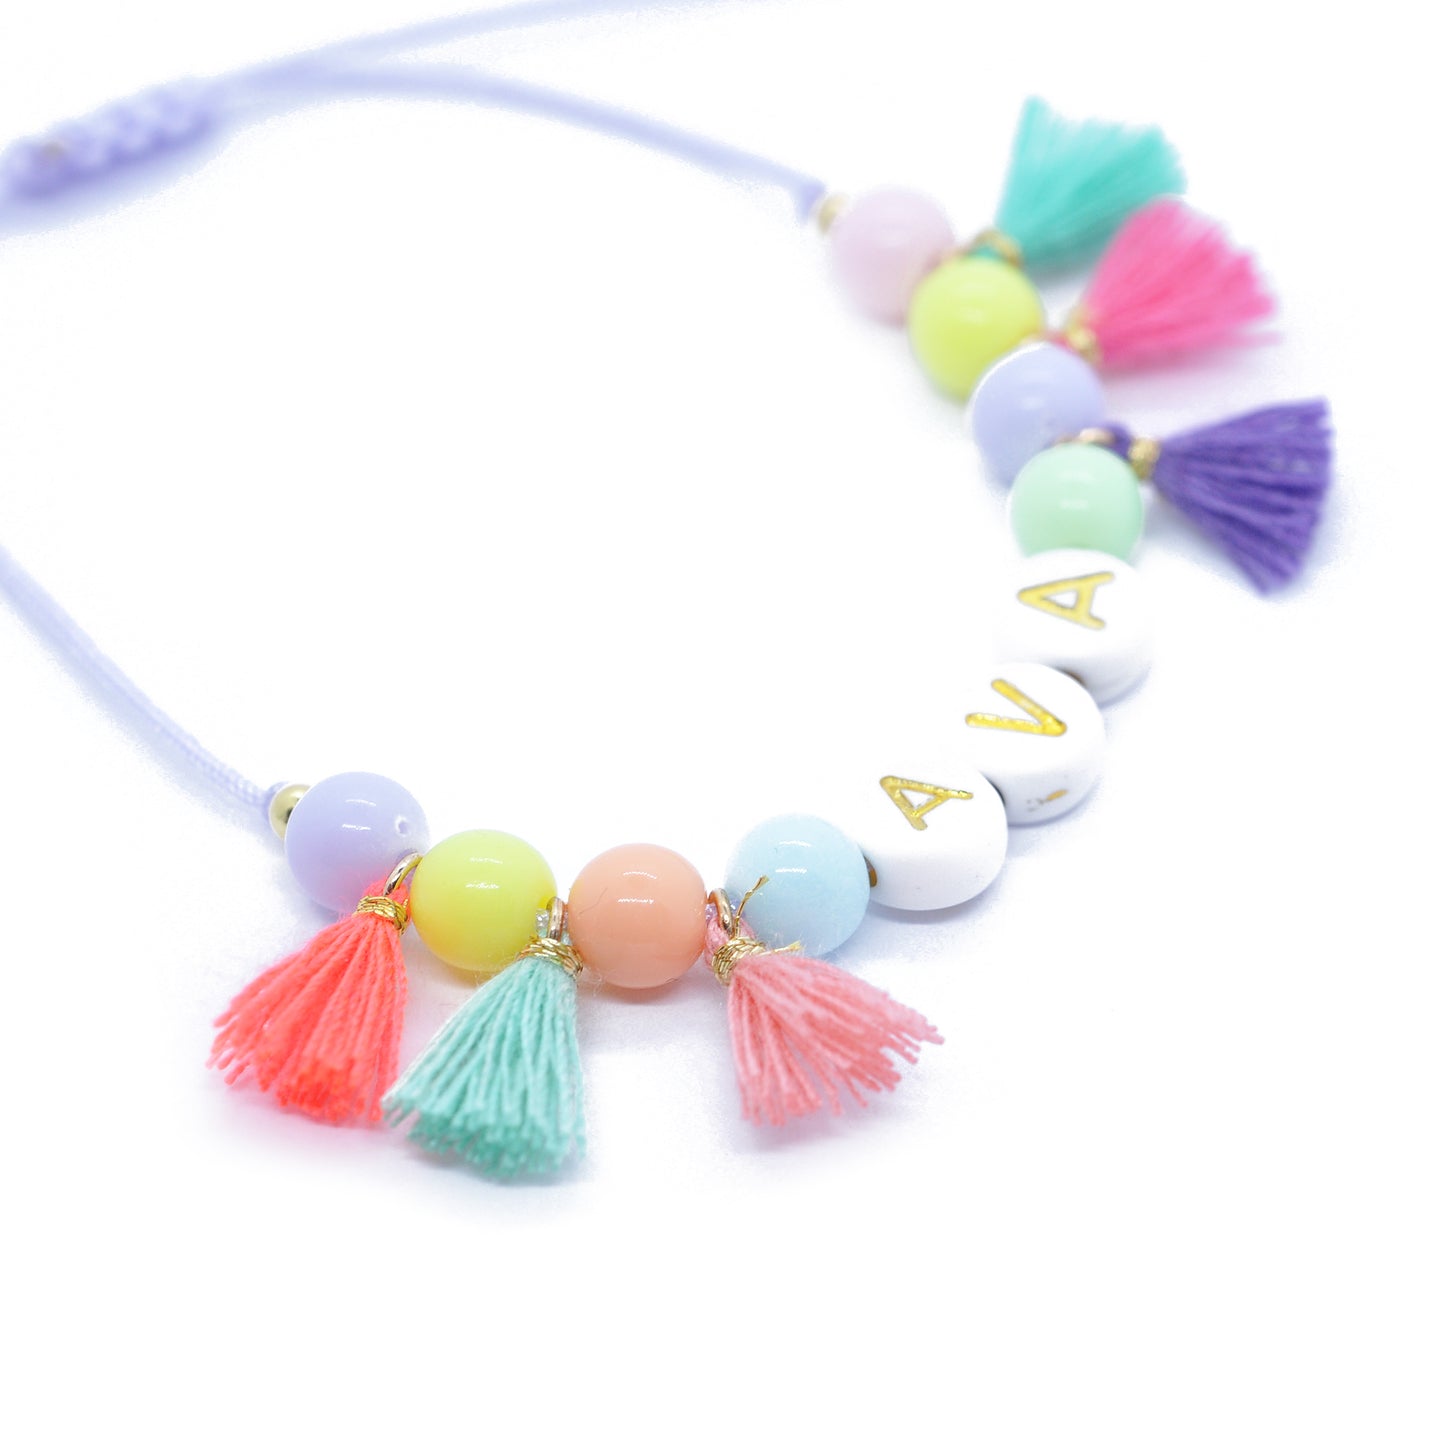 Personalized Name Bracelet - Flower Candy - Colorful Tassels